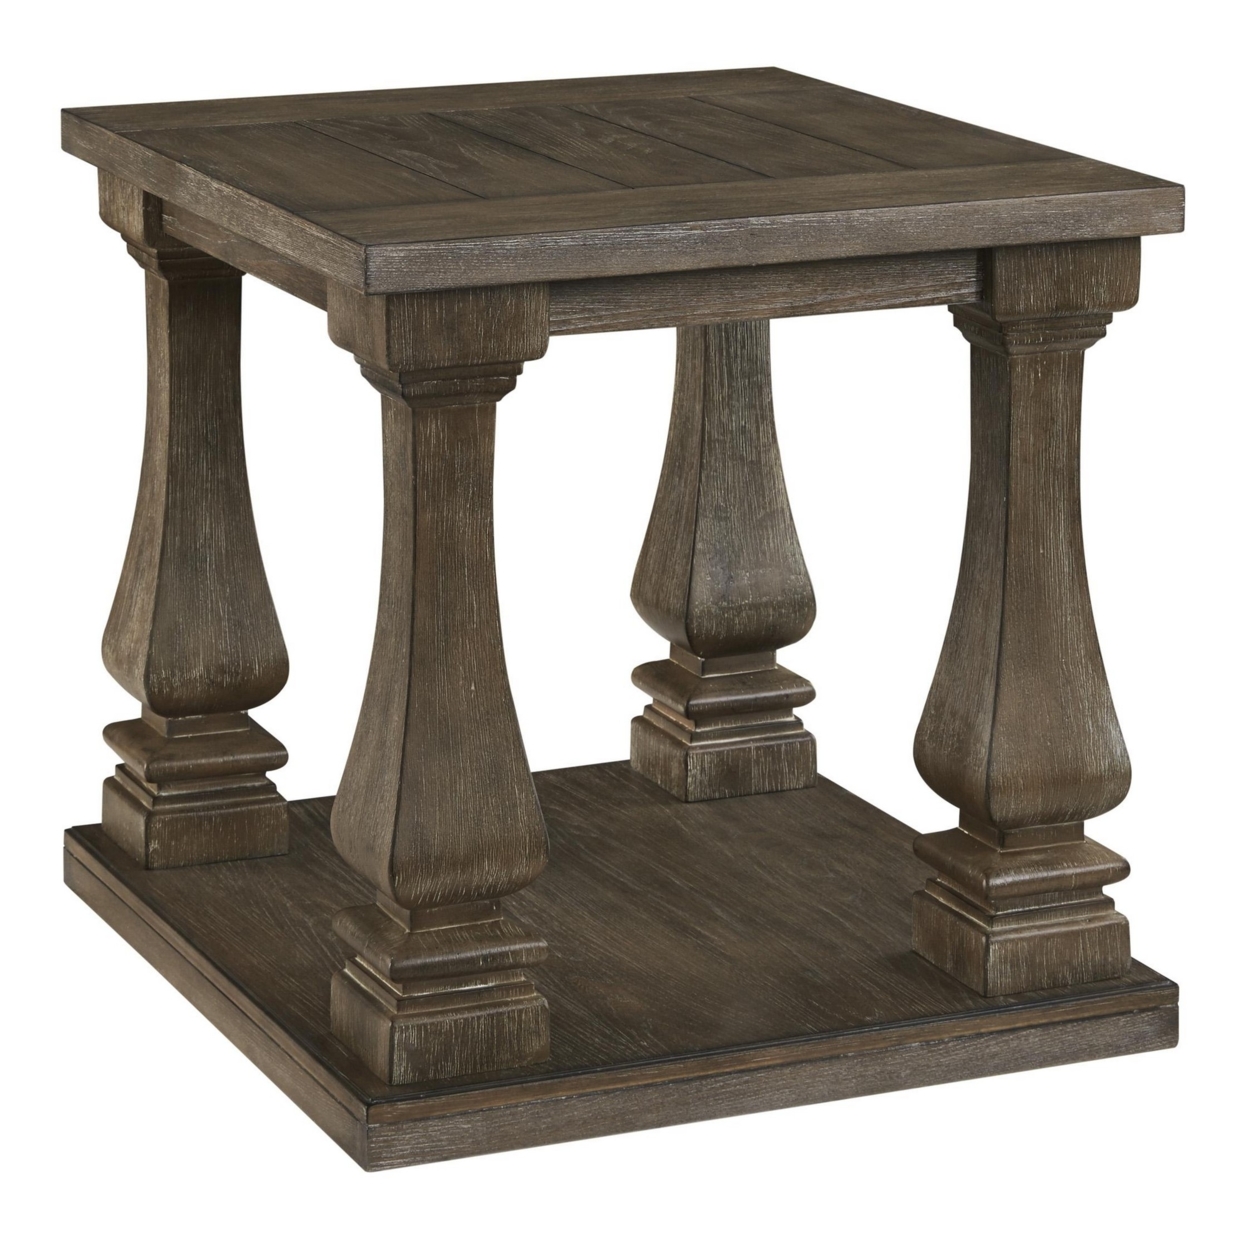 Plank Style End Table With Connected Legs And Open Shelf, White And Brown- Saltoro Sherpi